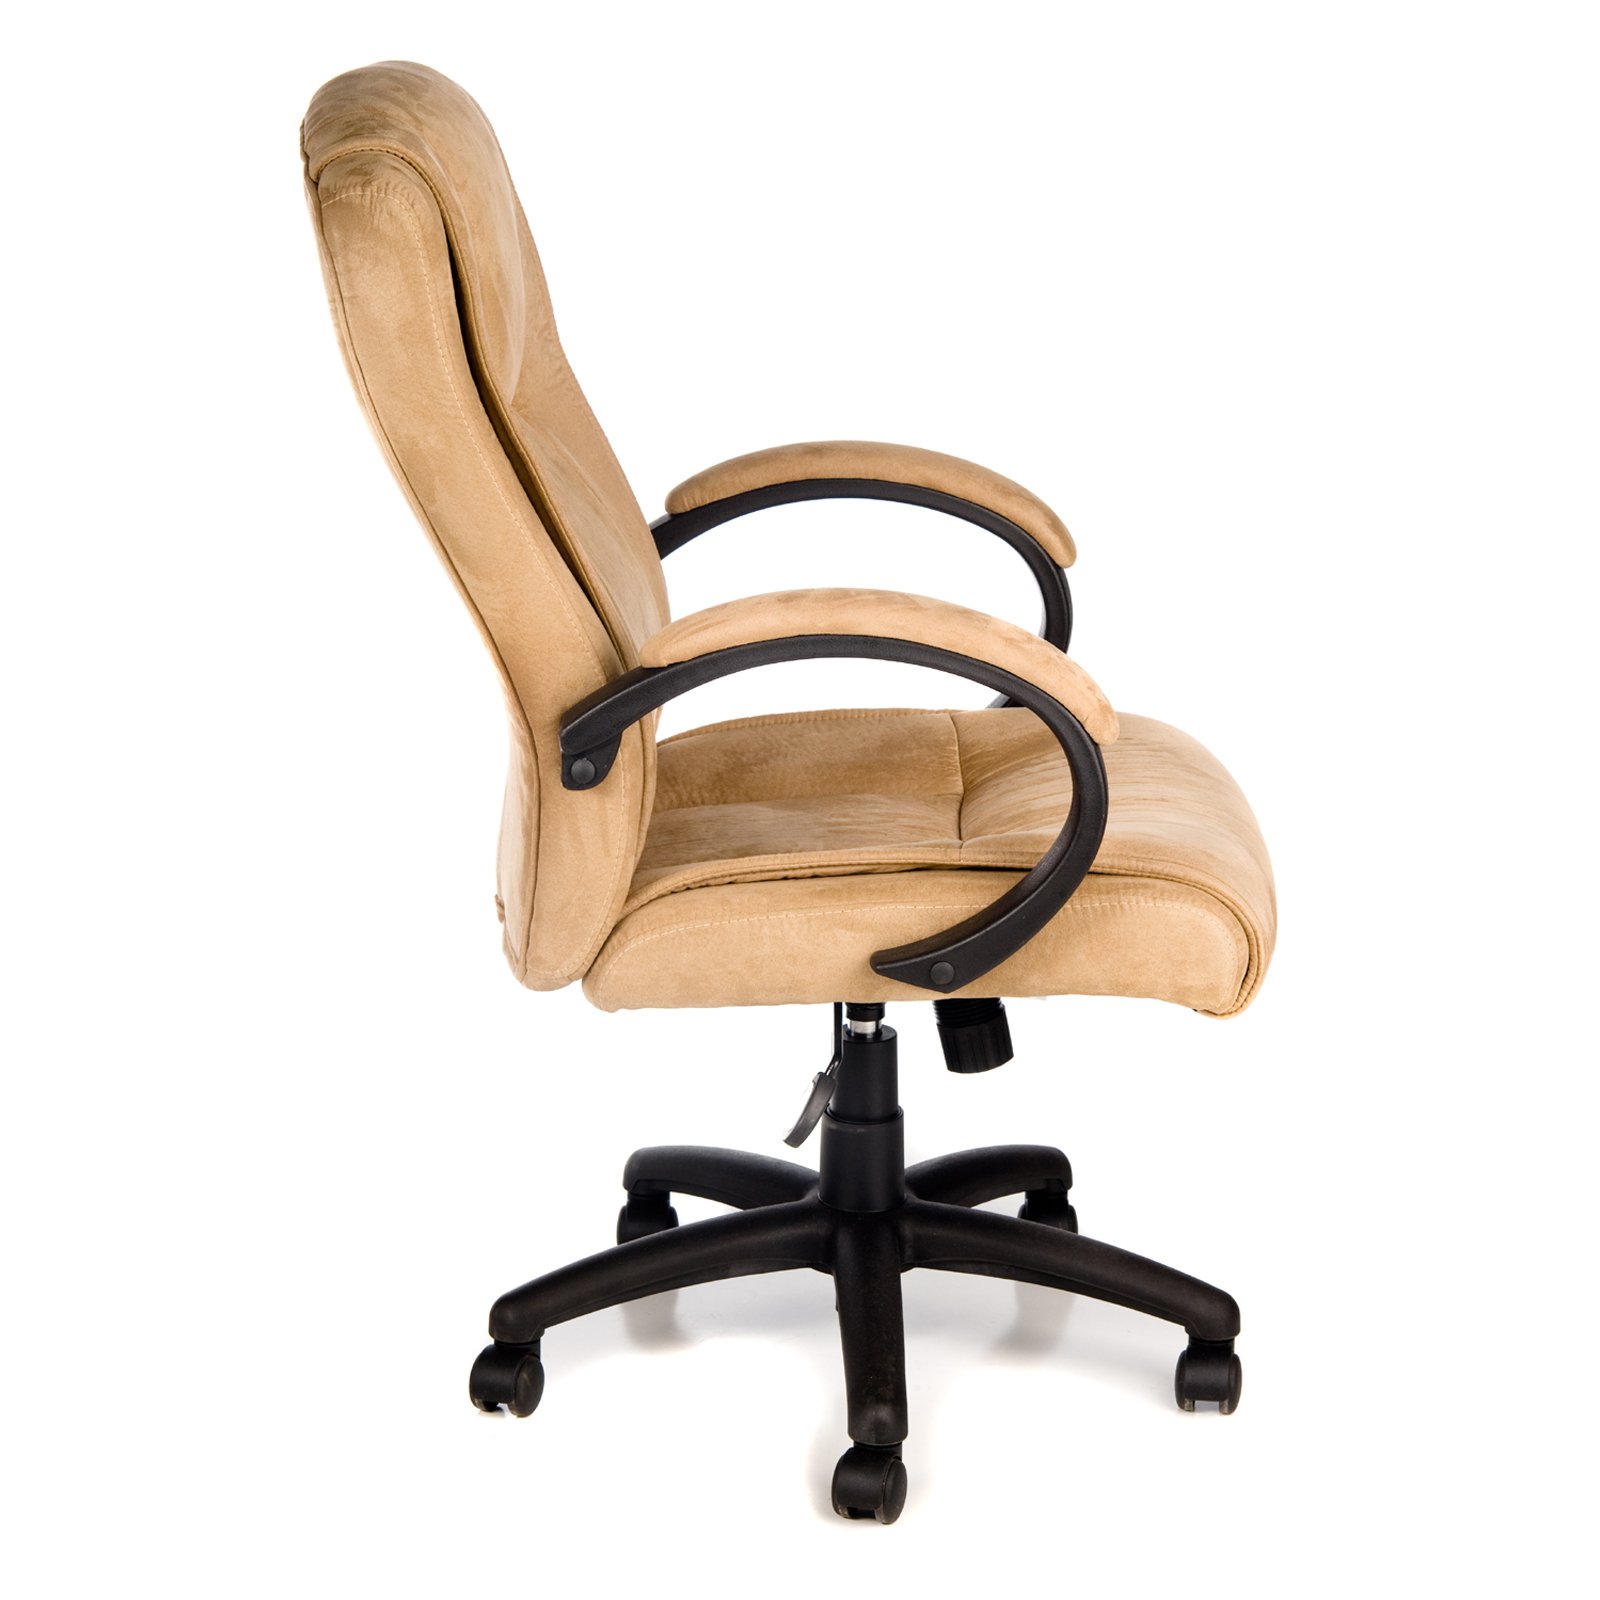 Comfort Products 60-0971 Padded Microfiber Fabric Executive Chair, Beige - image 3 of 3